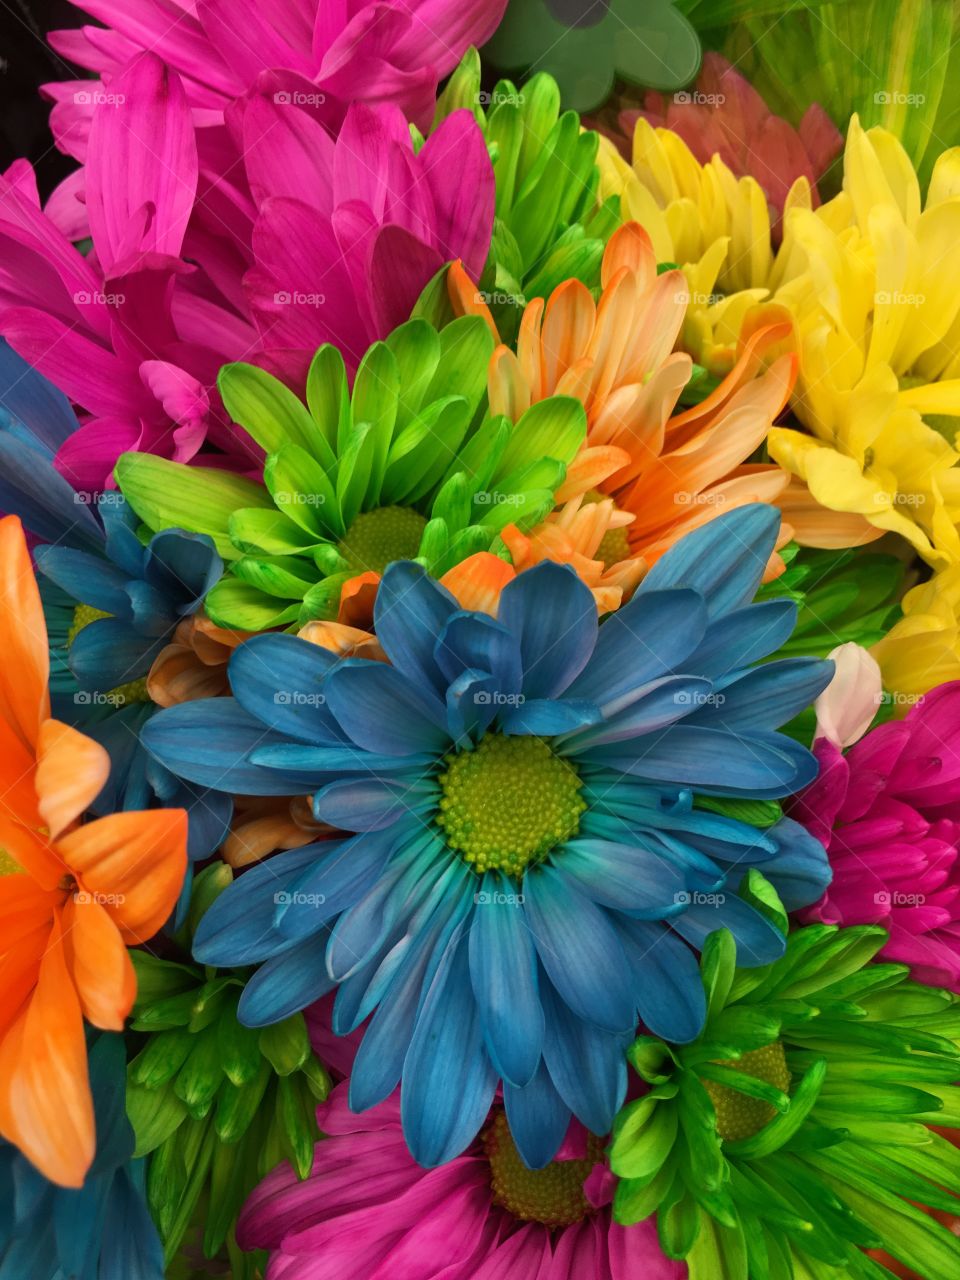 Assortment of vibrantly colorful flowers of blue, pink, green, orange and yellow.